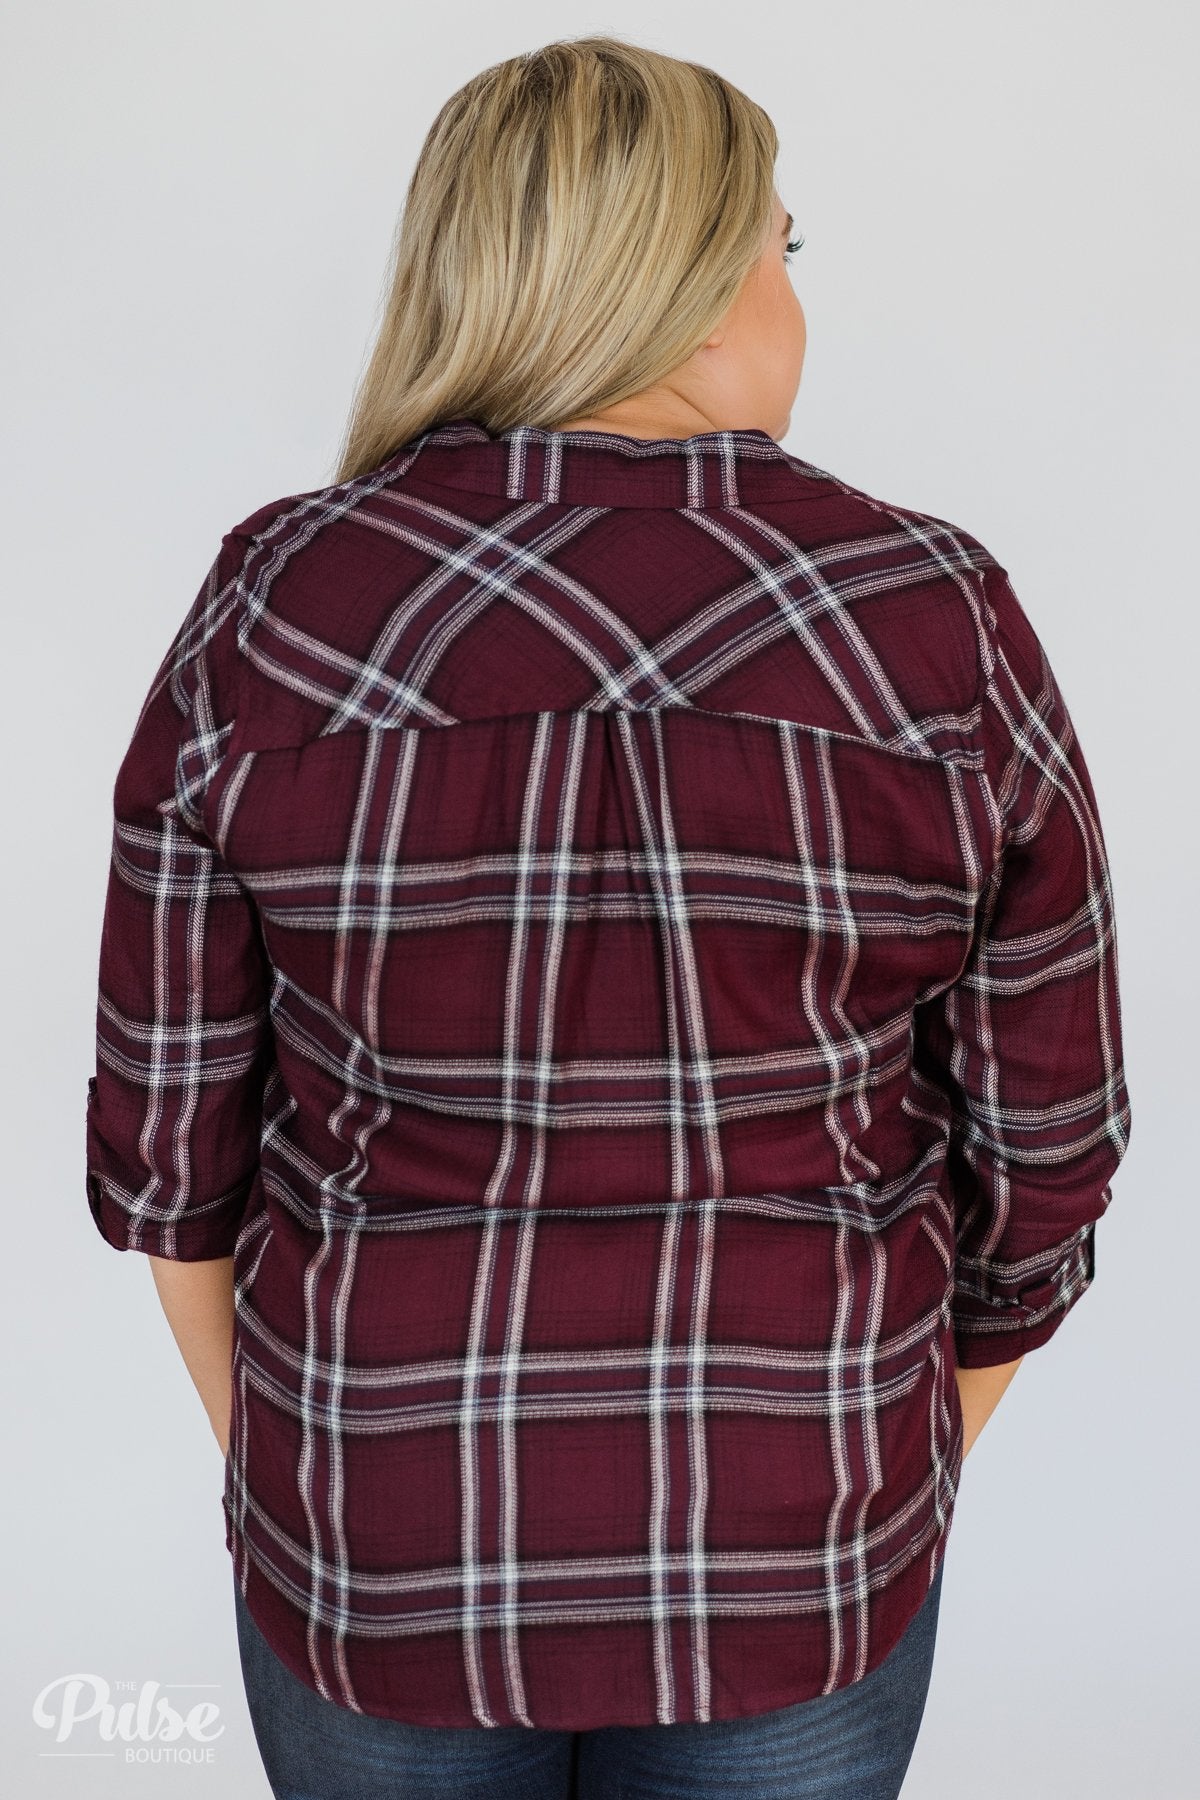 Easy Going Button Up Plaid Top- Plum